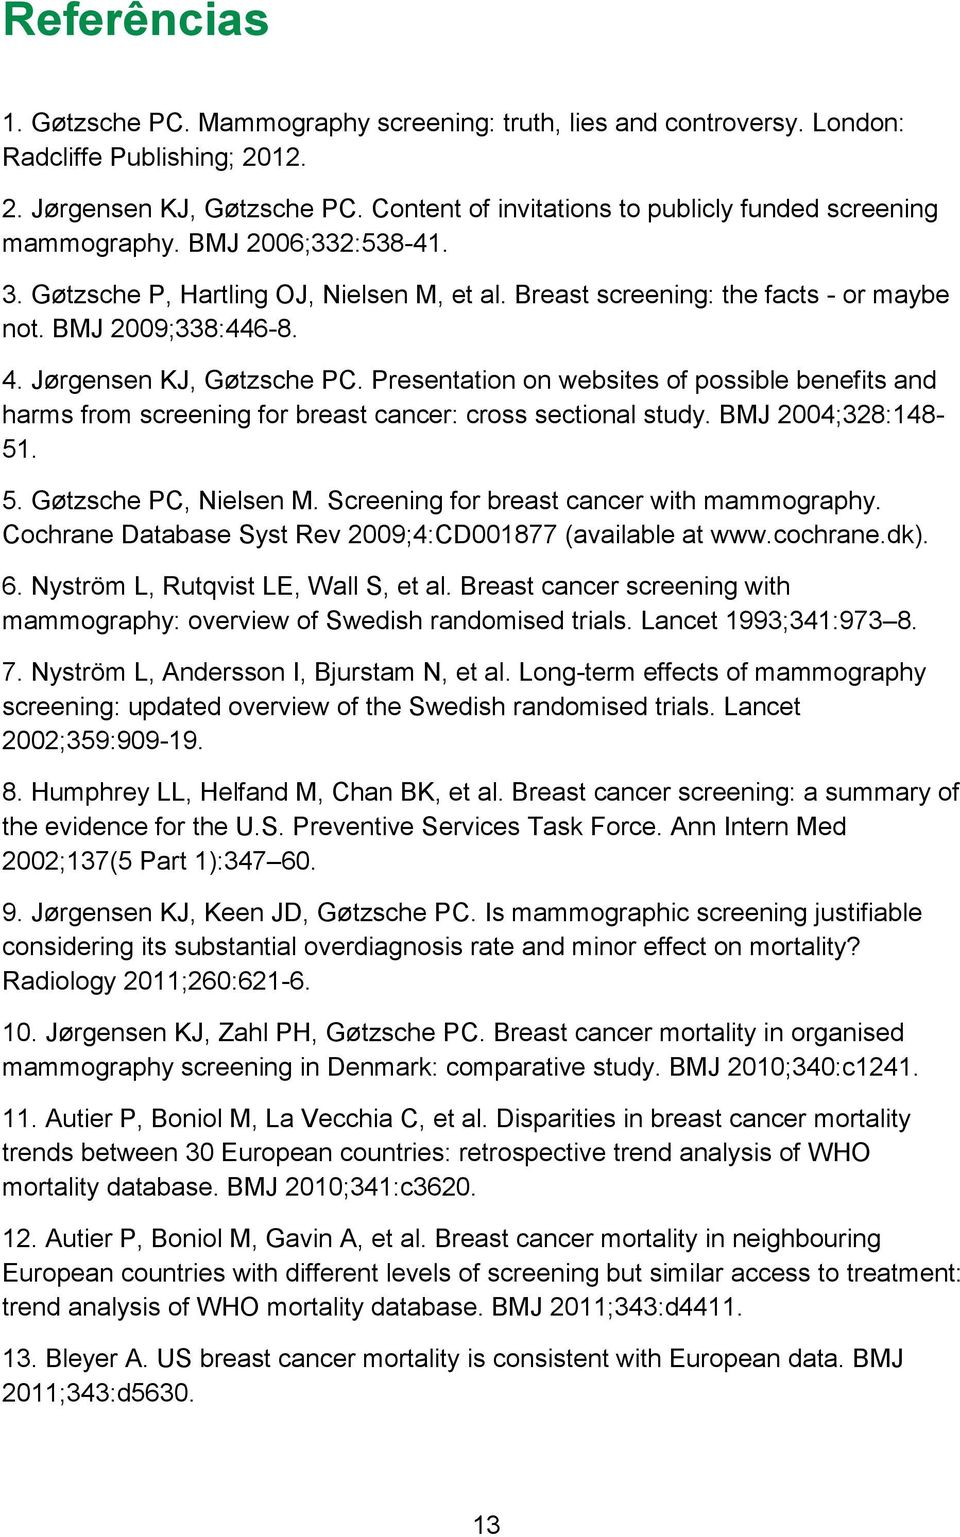 Jørgensen KJ, Gøtzsche PC. Presentation on websites of possible benefits and harms from screening for breast cancer: cross sectional study. BMJ 2004;328:148-51. 5. Gøtzsche PC, Nielsen M.